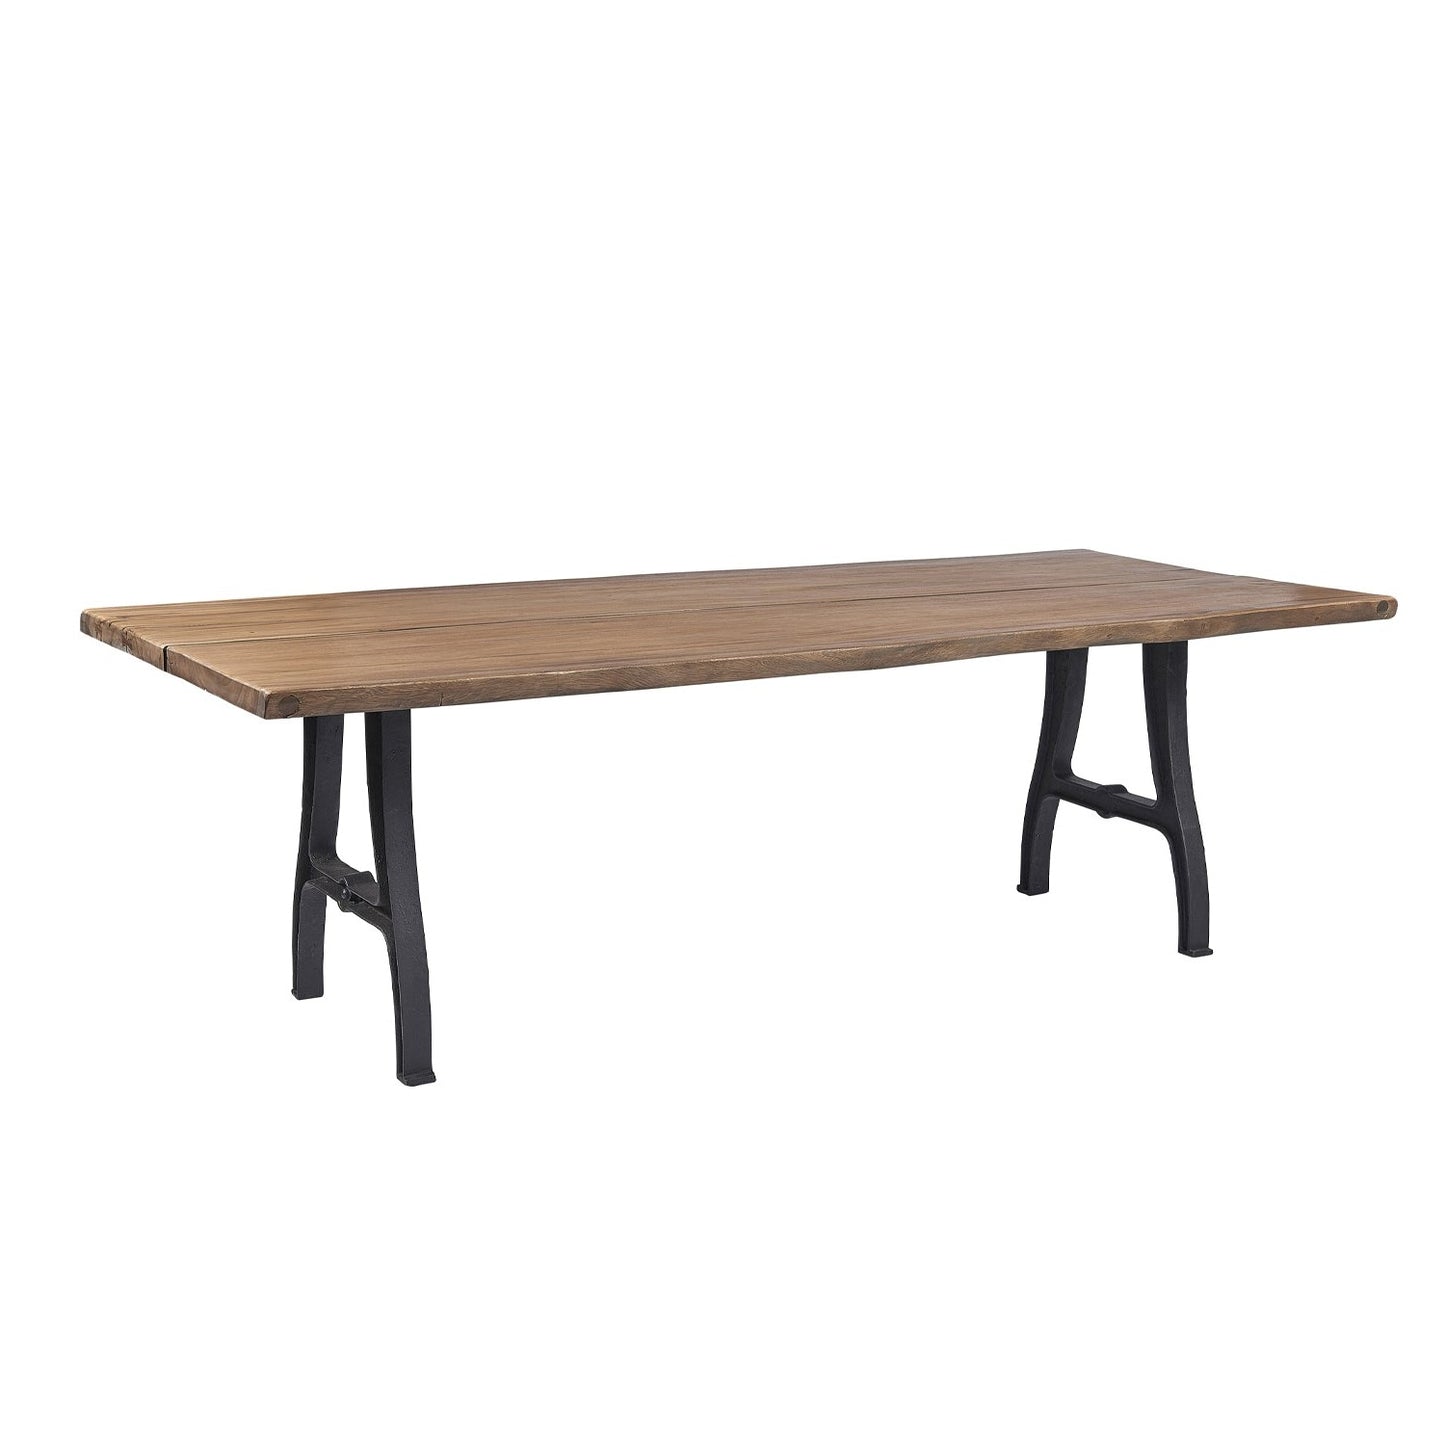 Monks Gate - 220cm Dining Table